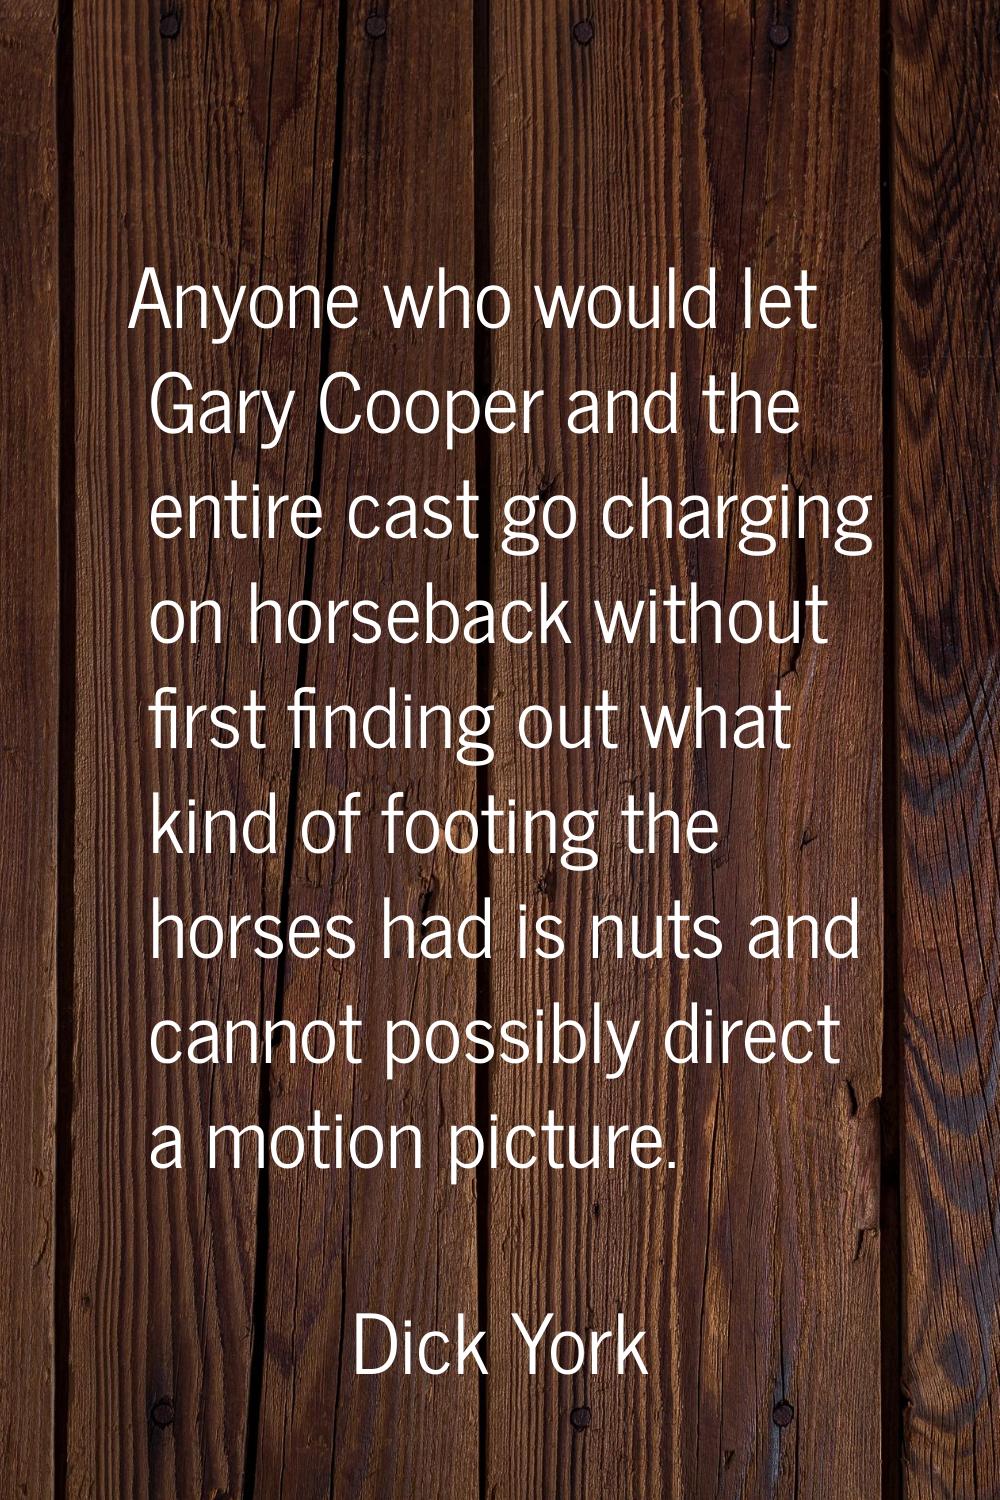 Anyone who would let Gary Cooper and the entire cast go charging on horseback without first finding